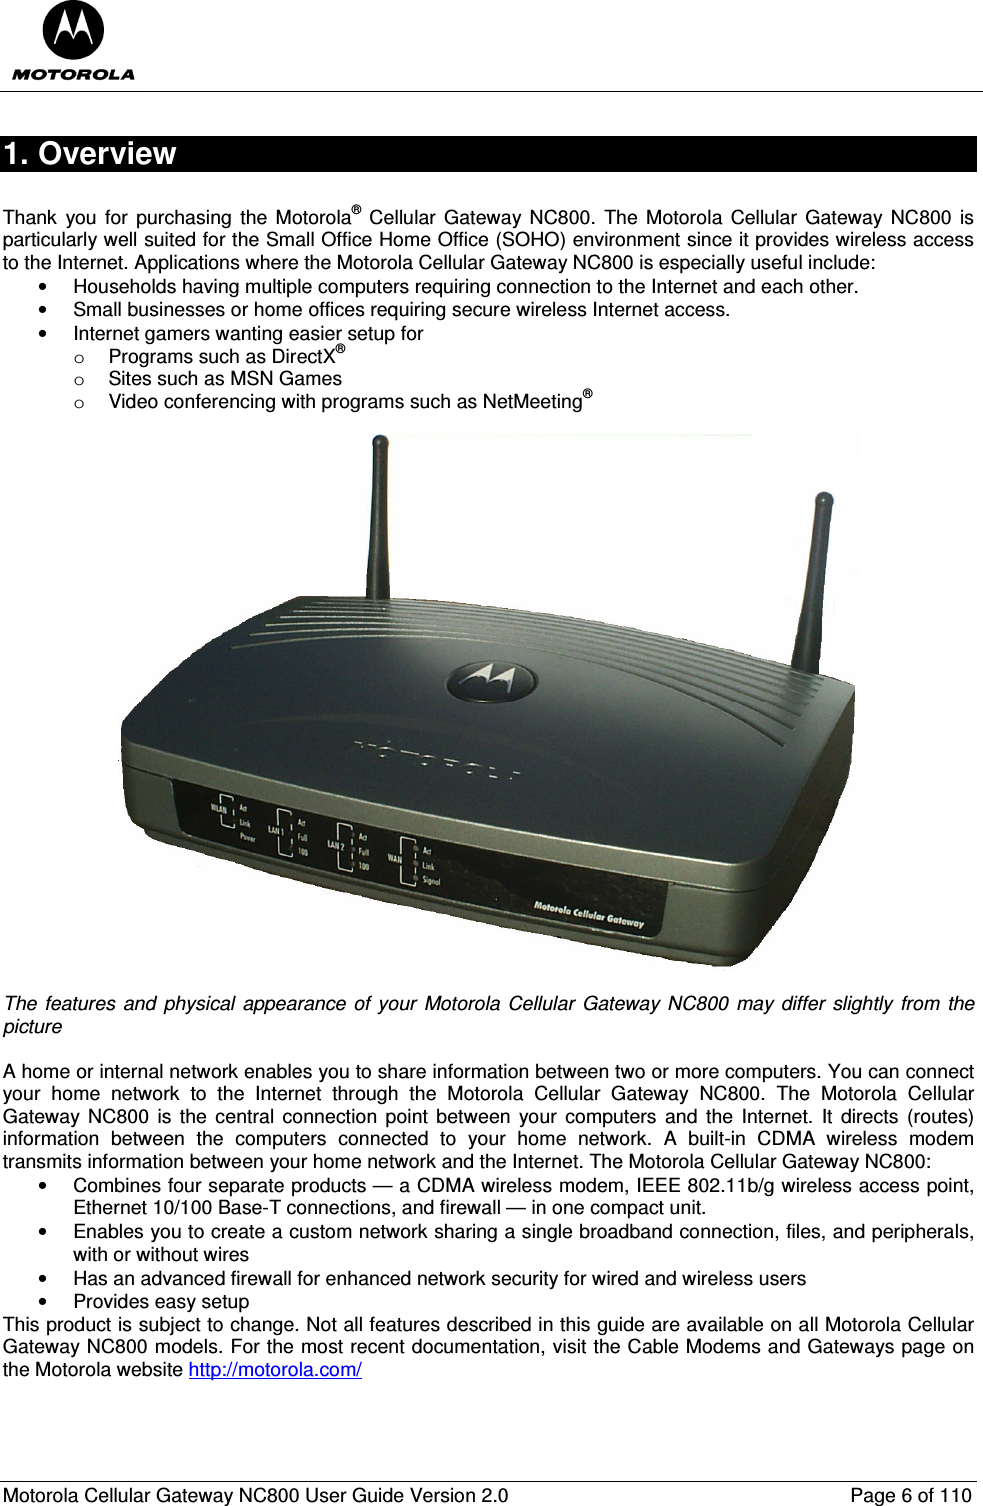  Motorola Cellular Gateway NC800 User Guide Version 2.0     Page 6 of 110  1. Overview  Thank  you  for  purchasing  the  Motorola®  Cellular  Gateway NC800.  The Motorola  Cellular Gateway NC800 is particularly well suited for the Small Office Home Office (SOHO) environment since it provides wireless access to the Internet. Applications where the Motorola Cellular Gateway NC800 is especially useful include: •  Households having multiple computers requiring connection to the Internet and each other. •  Small businesses or home offices requiring secure wireless Internet access. •  Internet gamers wanting easier setup for  o  Programs such as DirectX® o  Sites such as MSN Games o  Video conferencing with programs such as NetMeeting®    The  features  and  physical  appearance  of  your  Motorola Cellular  Gateway NC800  may  differ  slightly  from  the picture  A home or internal network enables you to share information between two or more computers. You can connect your  home  network  to  the  Internet  through  the  Motorola  Cellular  Gateway  NC800.  The  Motorola  Cellular Gateway  NC800  is the  central  connection  point between  your  computers  and  the Internet. It  directs  (routes) information  between  the  computers  connected  to  your  home  network.  A  built-in  CDMA  wireless  modem transmits information between your home network and the Internet. The Motorola Cellular Gateway NC800: •  Combines four separate products — a CDMA wireless modem, IEEE 802.11b/g wireless access point, Ethernet 10/100 Base-T connections, and firewall — in one compact unit. •  Enables you to create a custom network sharing a single broadband connection, files, and peripherals, with or without wires •  Has an advanced firewall for enhanced network security for wired and wireless users •  Provides easy setup This product is subject to change. Not all features described in this guide are available on all Motorola Cellular Gateway NC800 models. For the most recent documentation, visit the Cable Modems and Gateways page on the Motorola website http://motorola.com/  